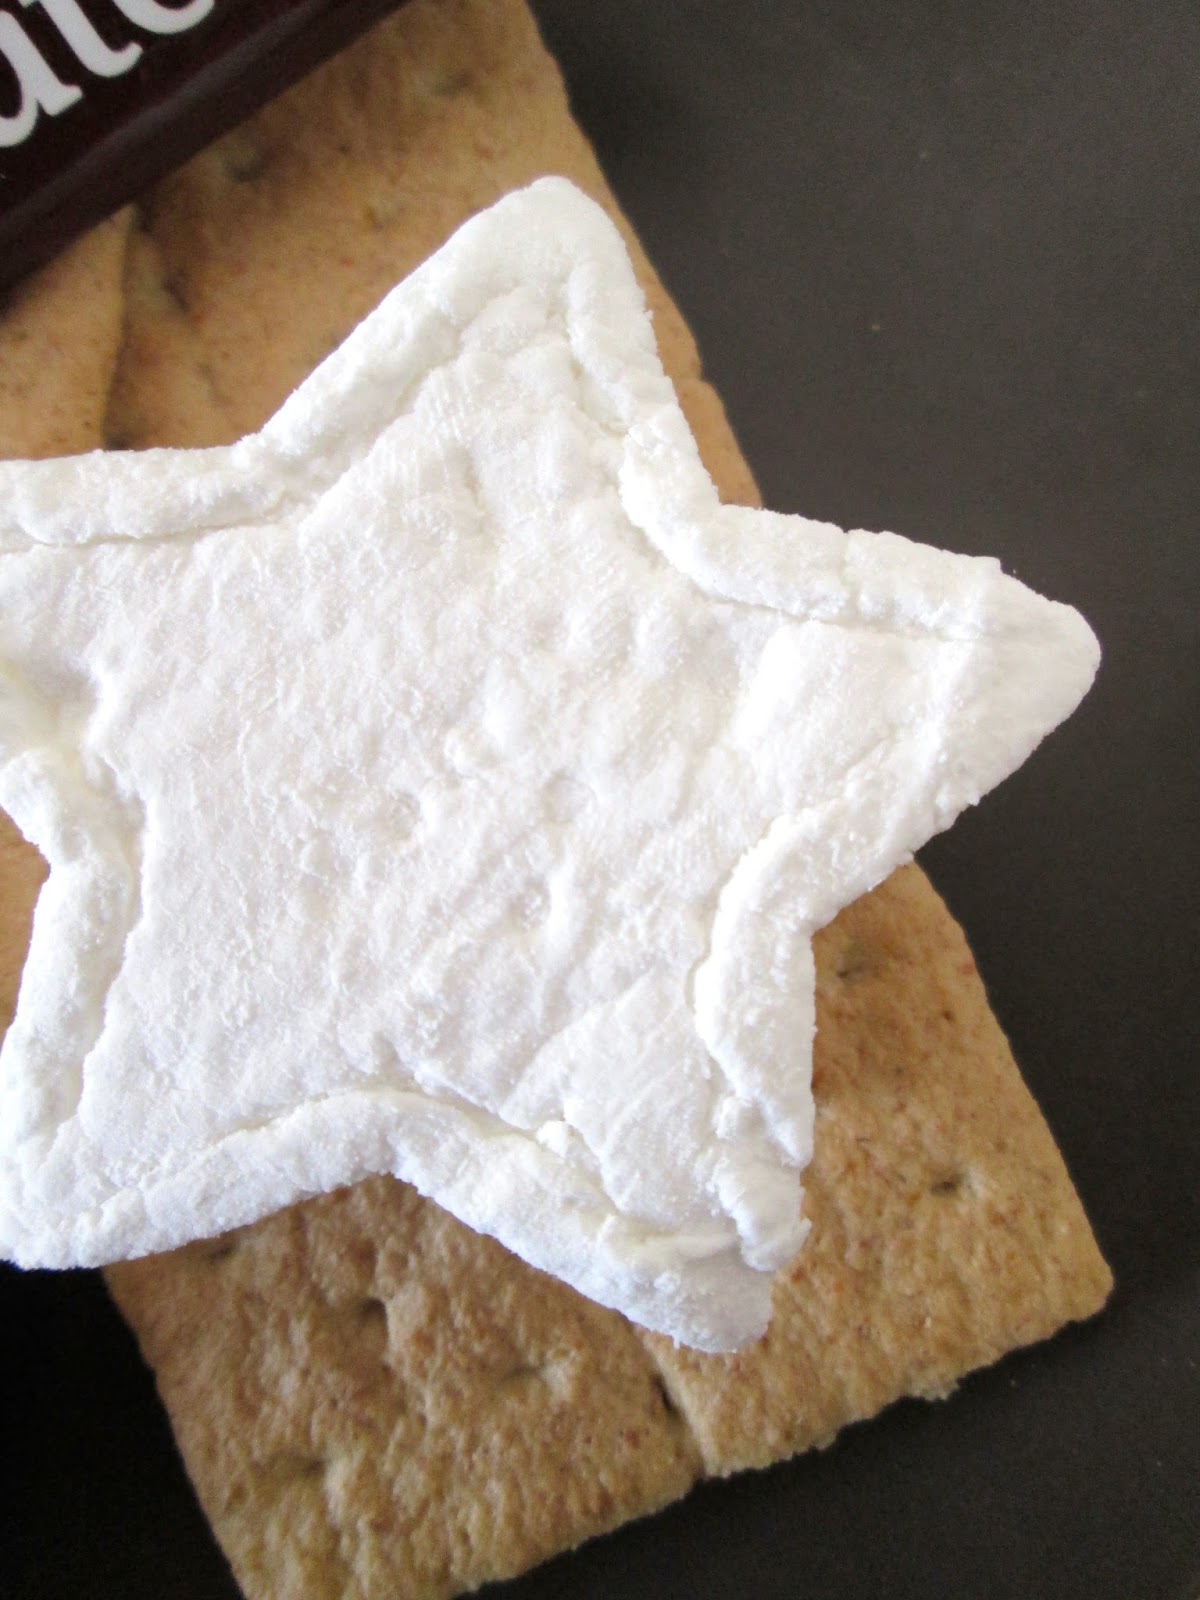 Easy homemade marshmallows just in time for your July 4th bonfires!